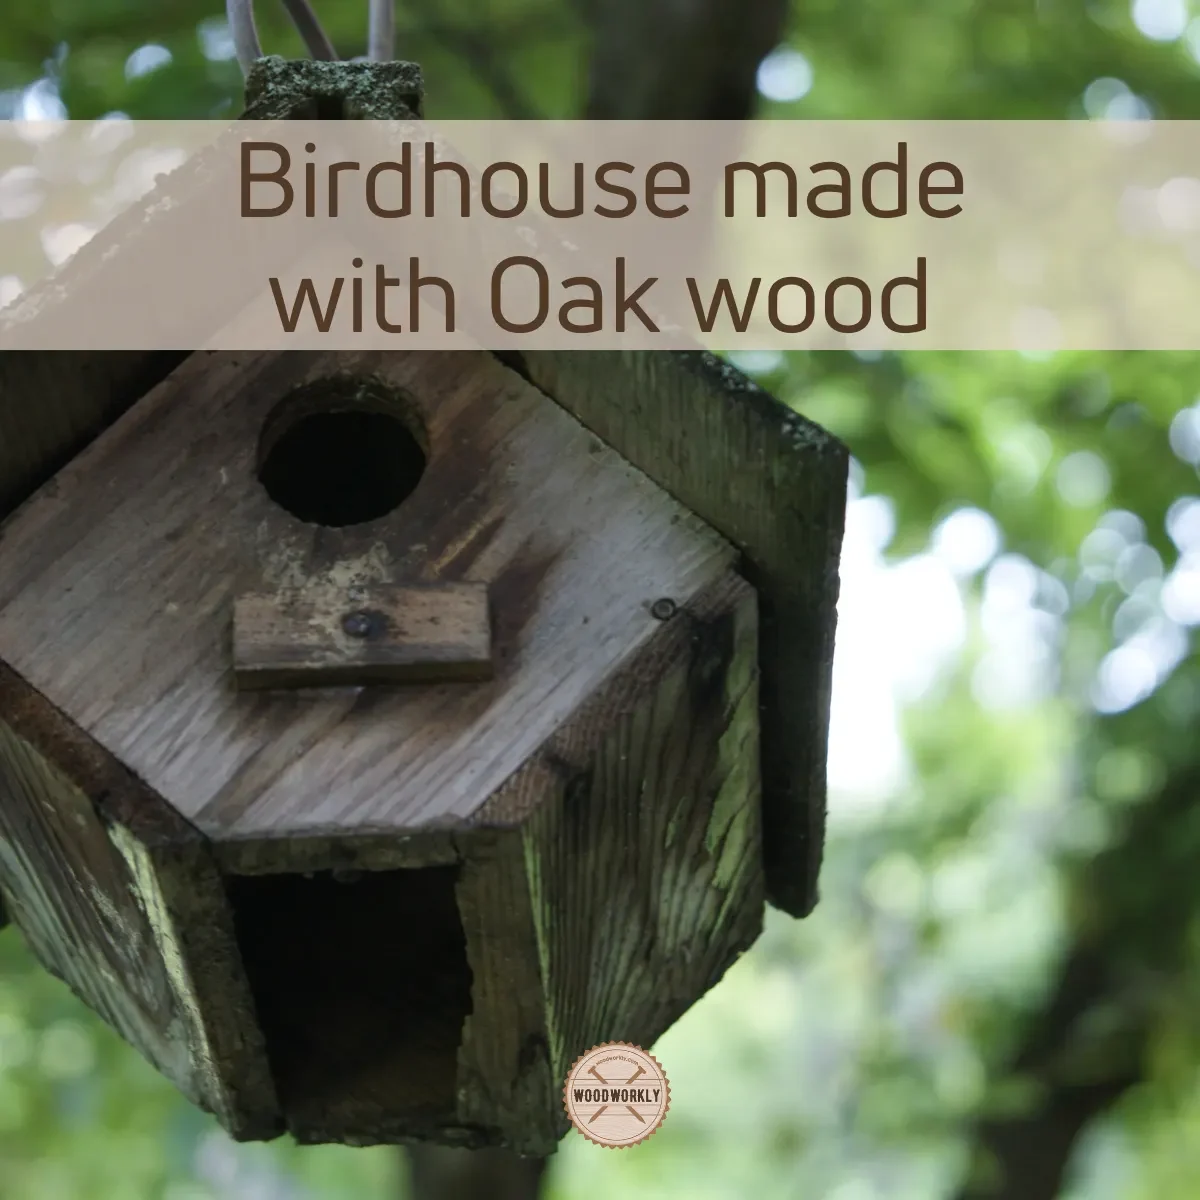 Birdhouse made with Oak wood